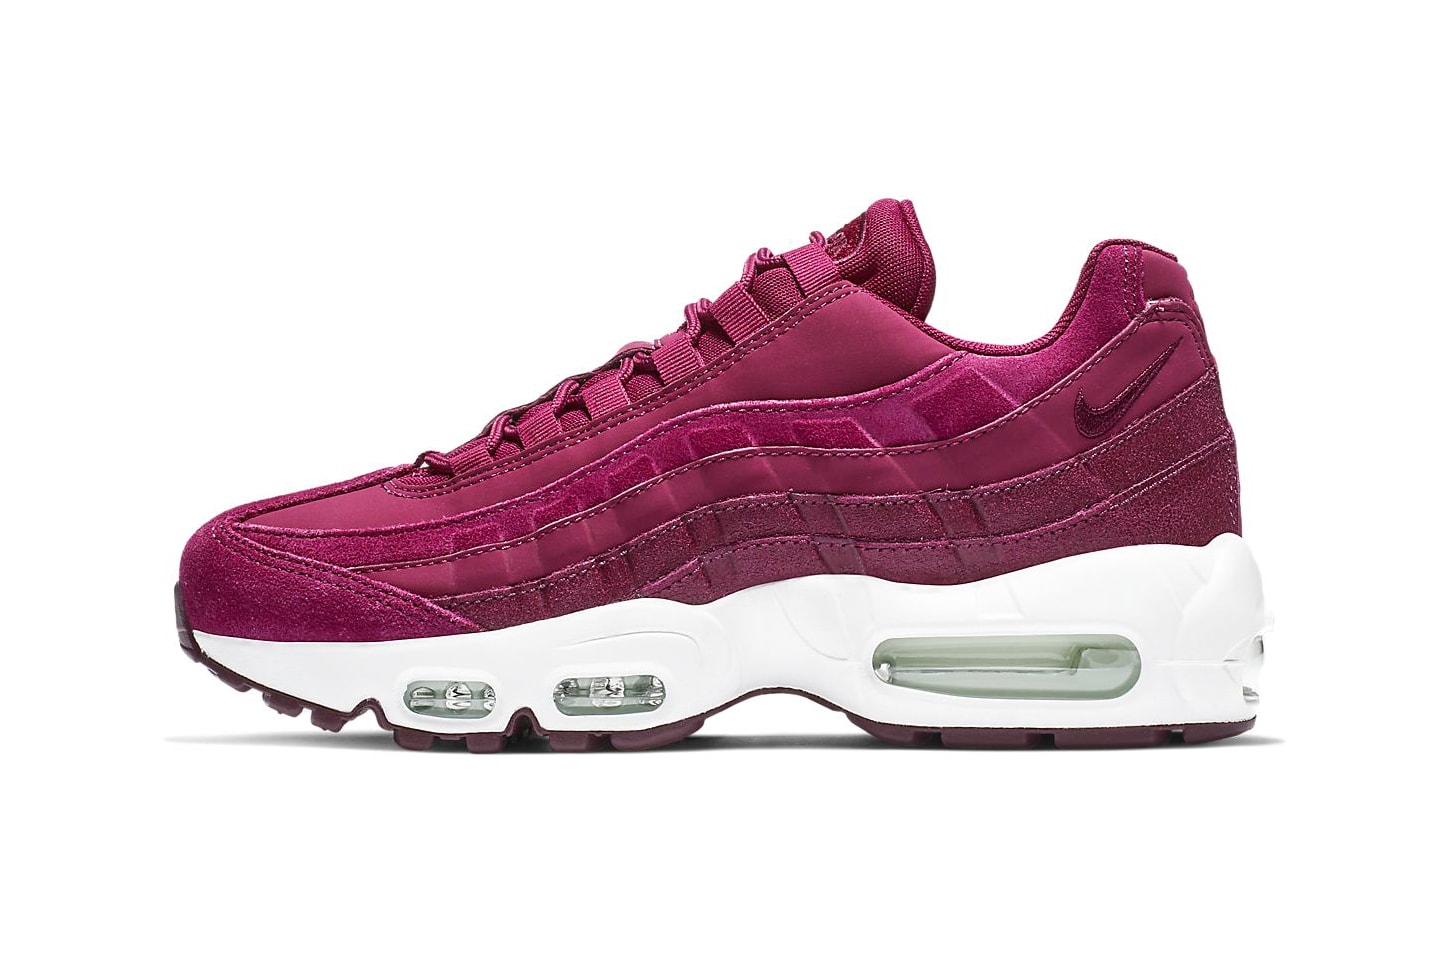 Nike Air Max 95 True Berry Summit White Deep Pink Sneakers Trainers